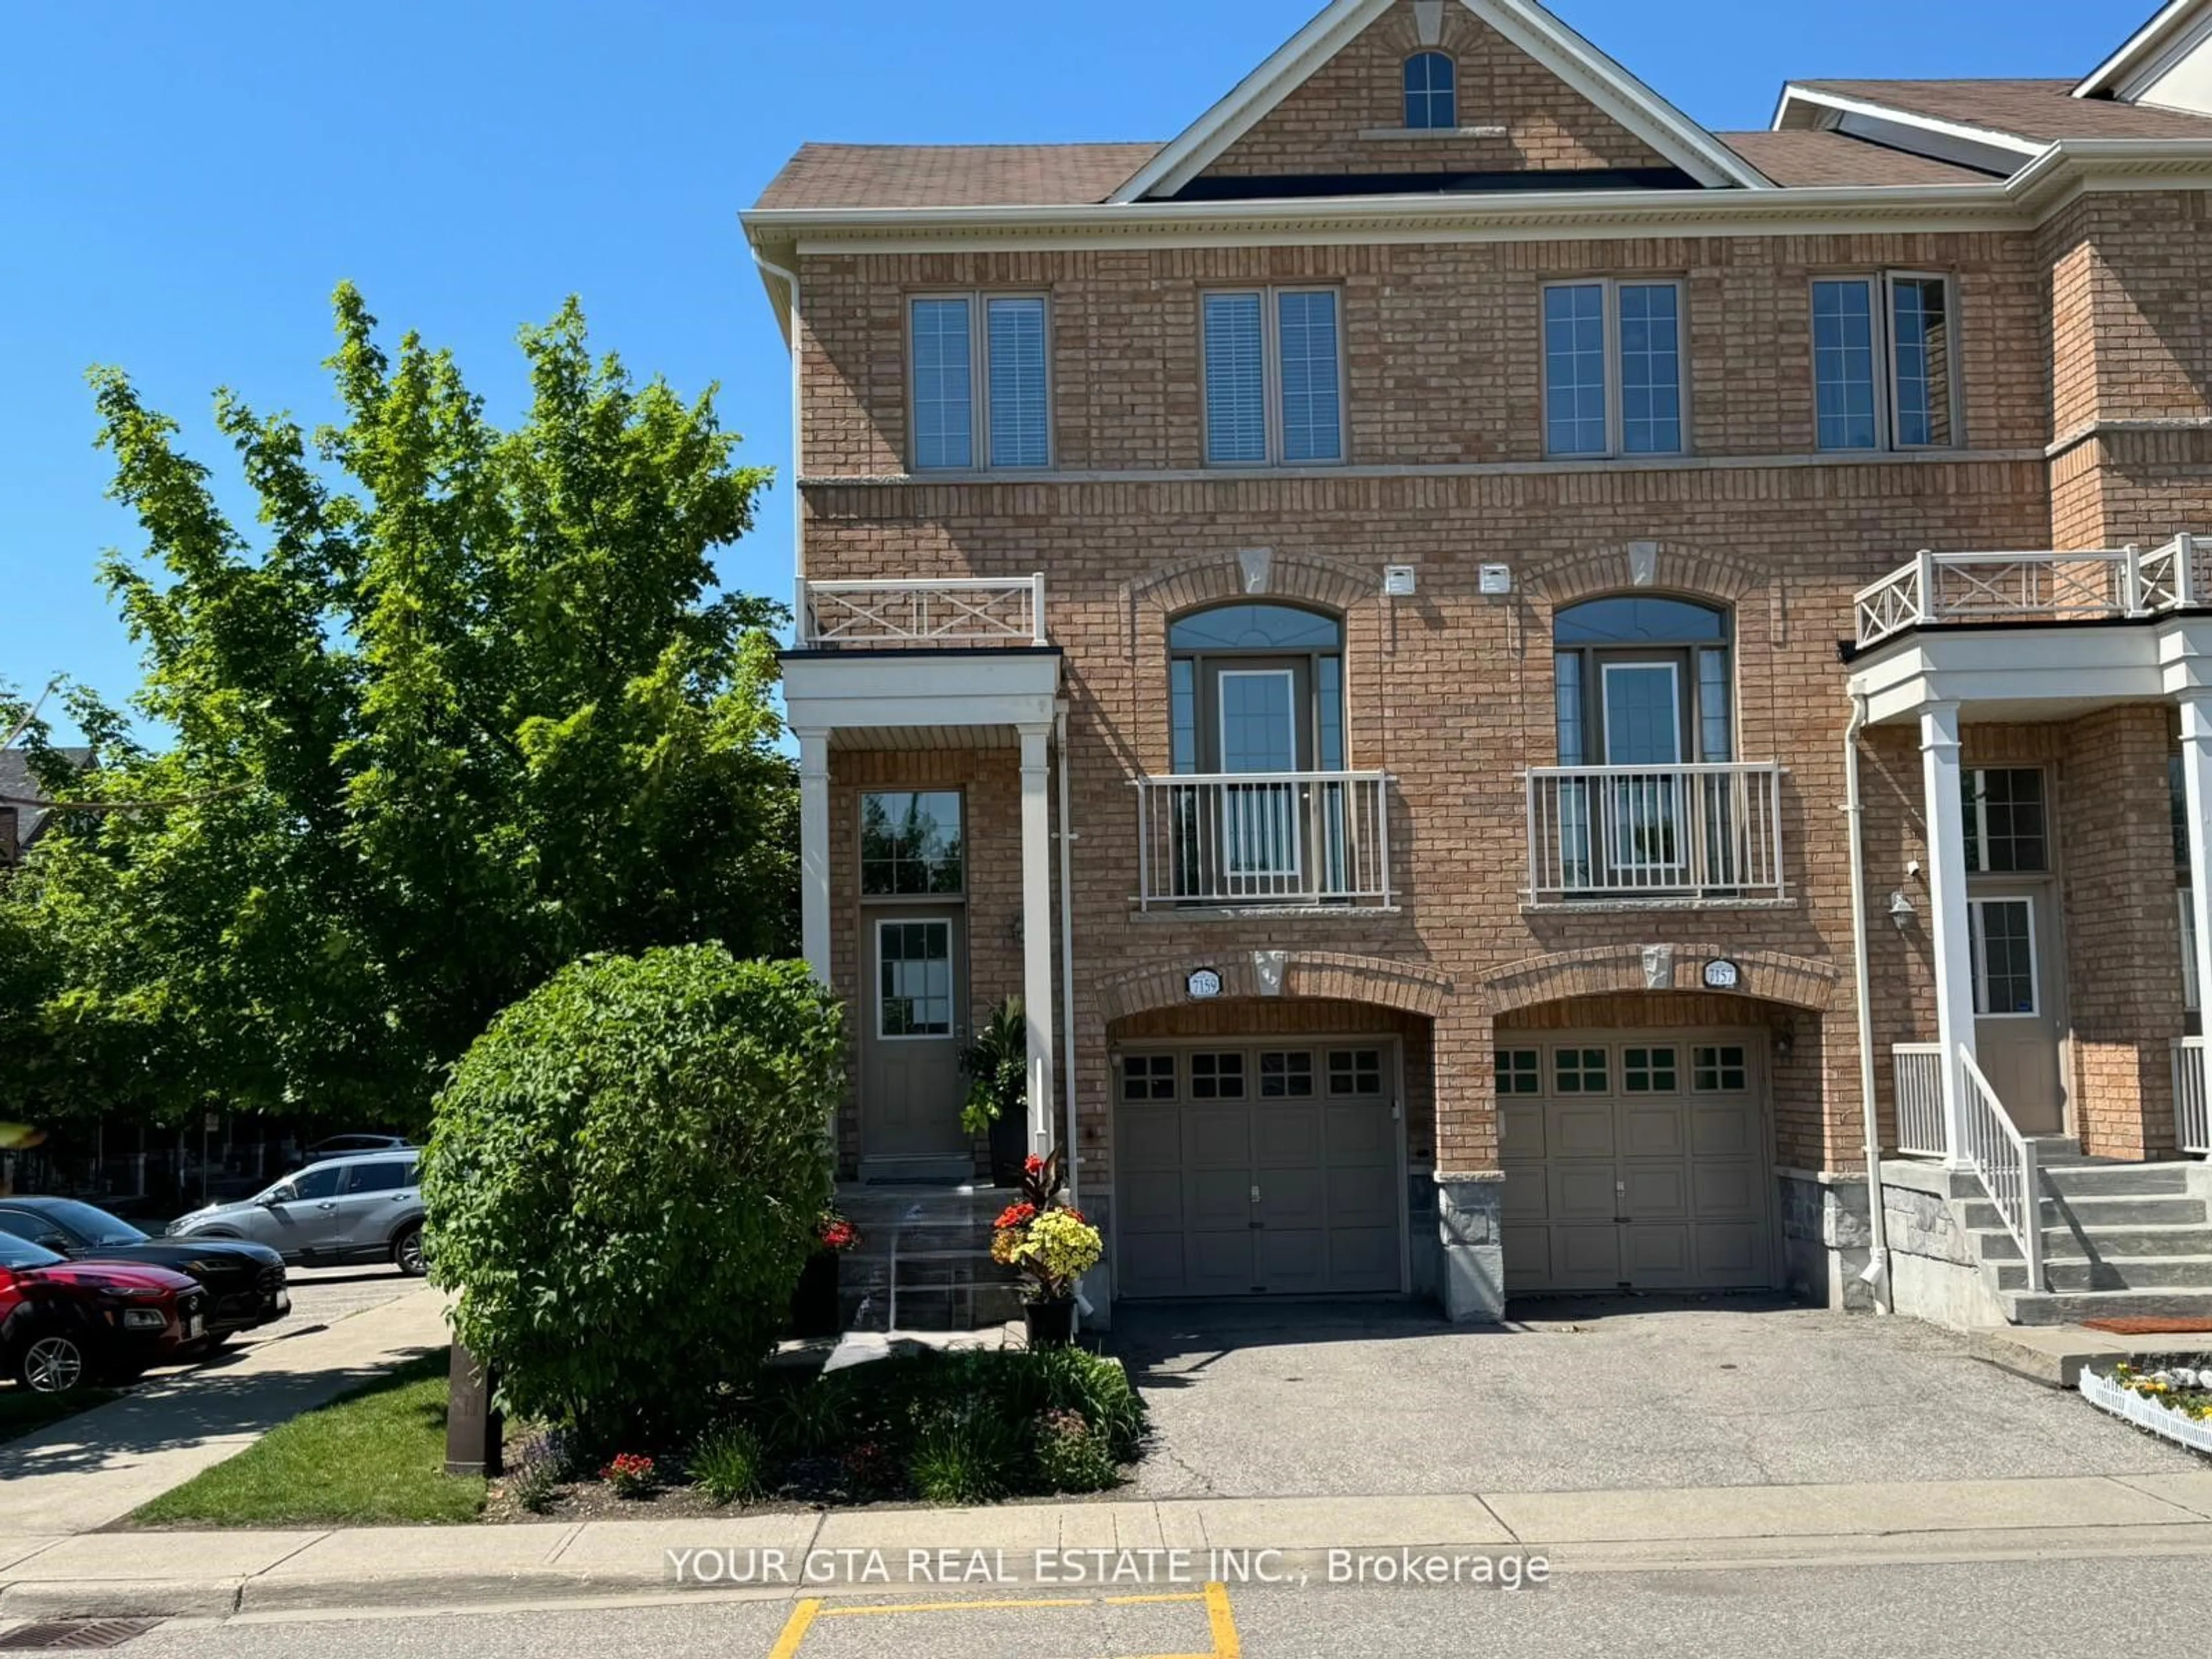 A pic from exterior of the house or condo for 7159 Triumph Lane, Mississauga Ontario L5N 0C5